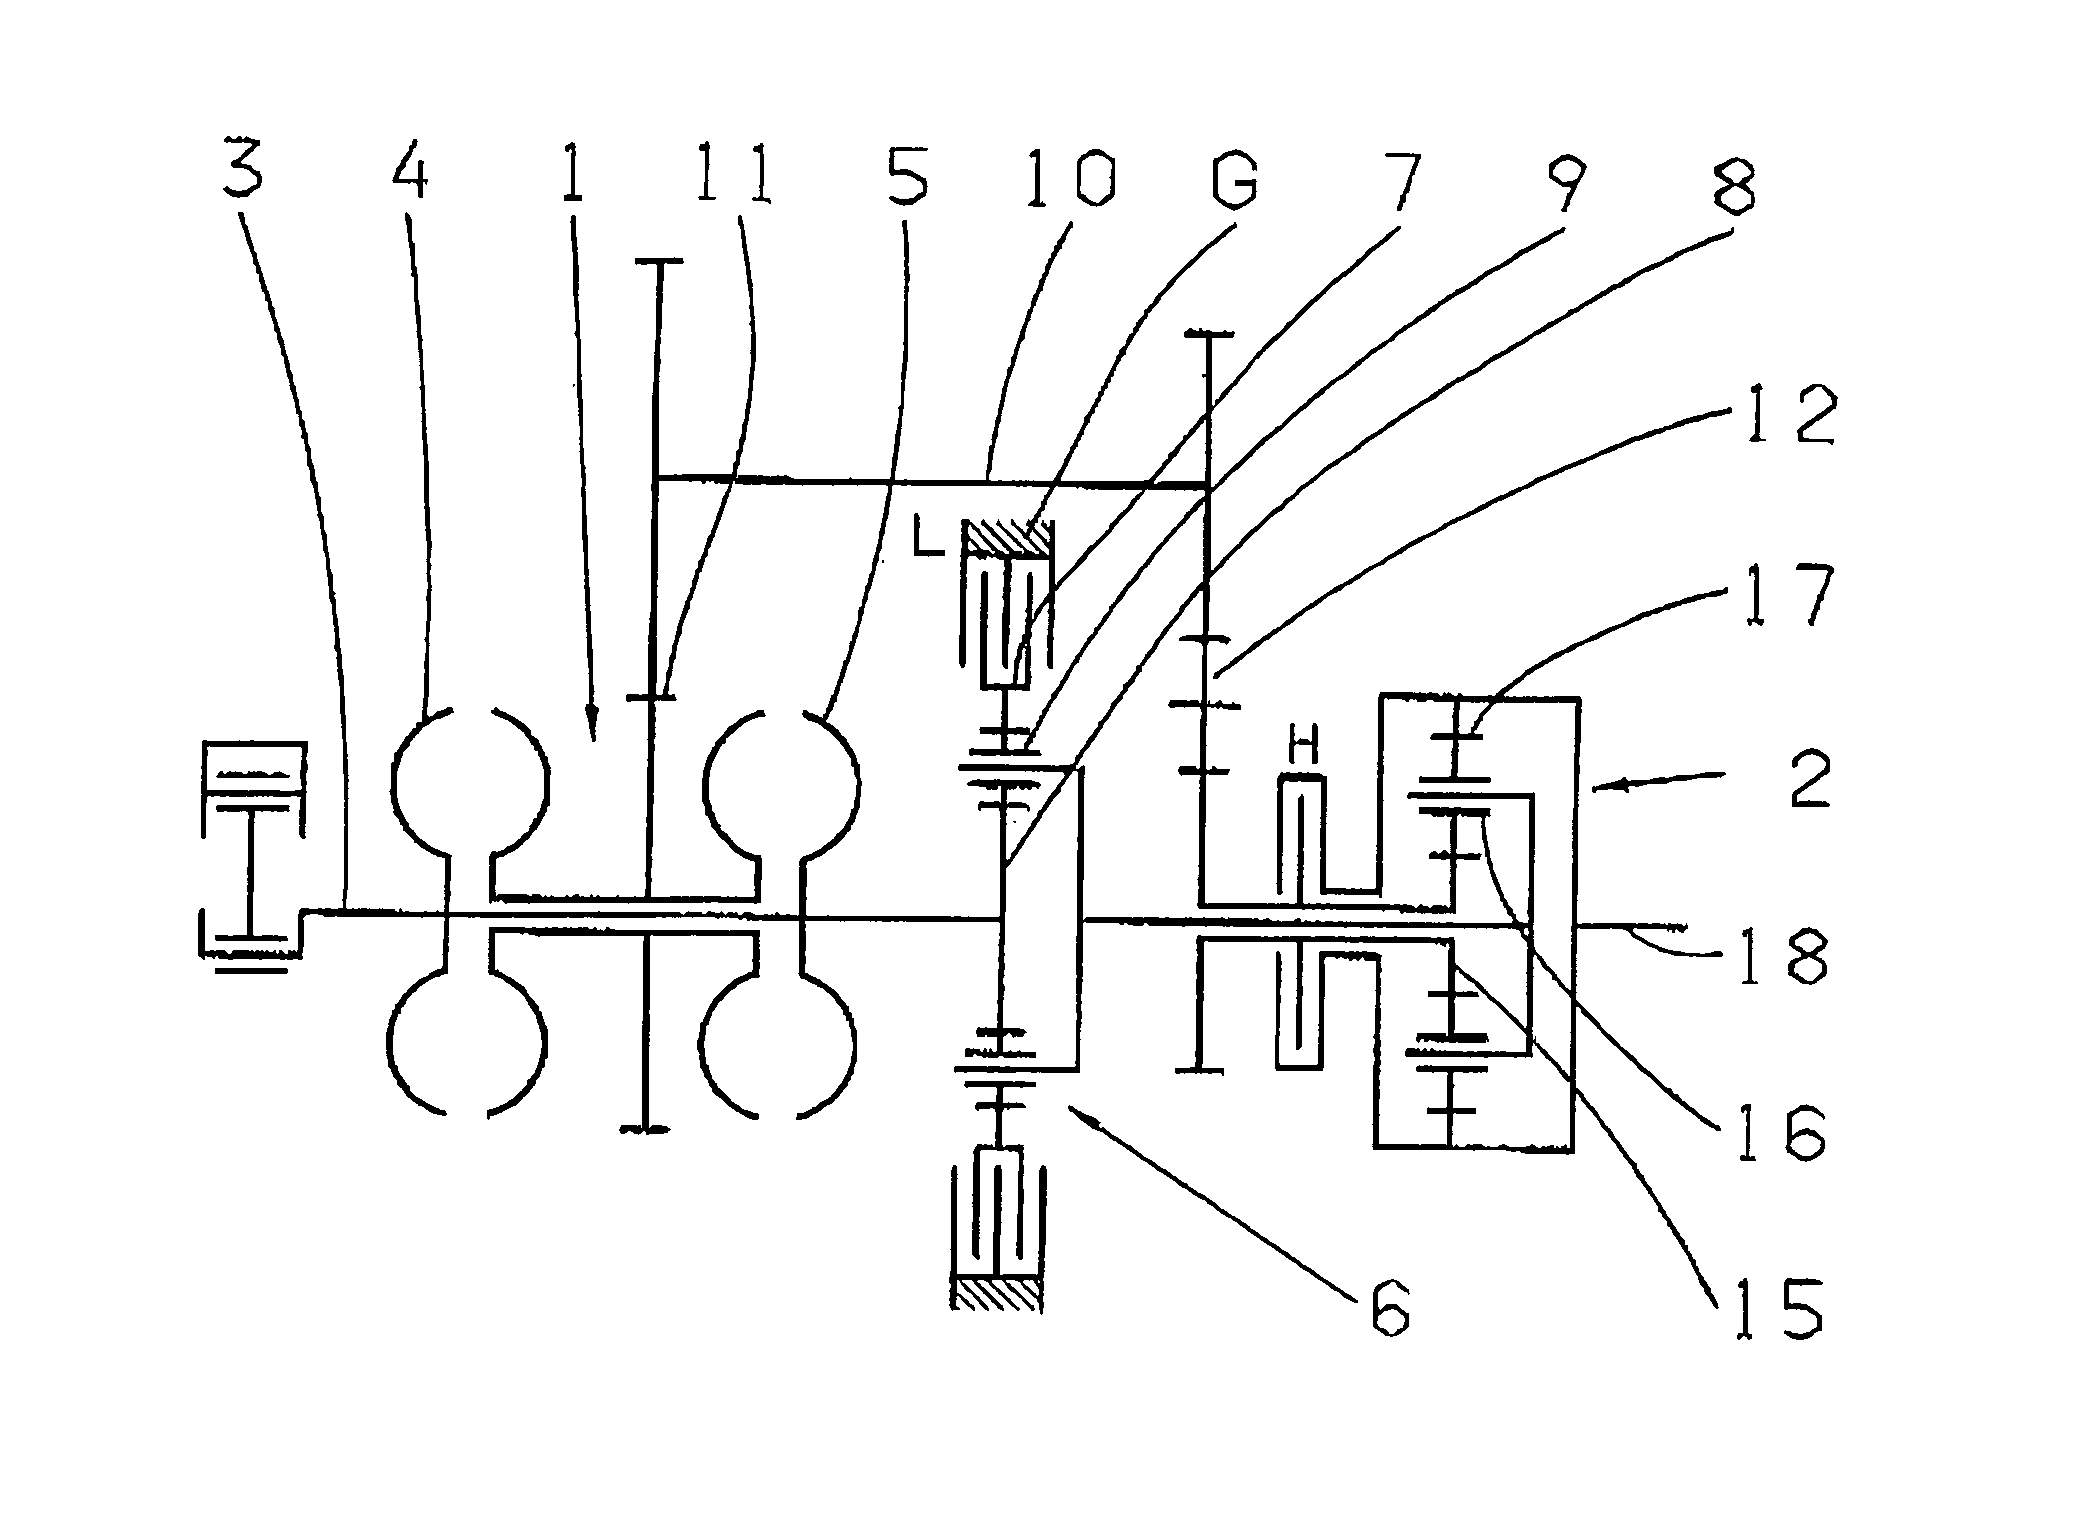 Split power transmission to include a variable drive